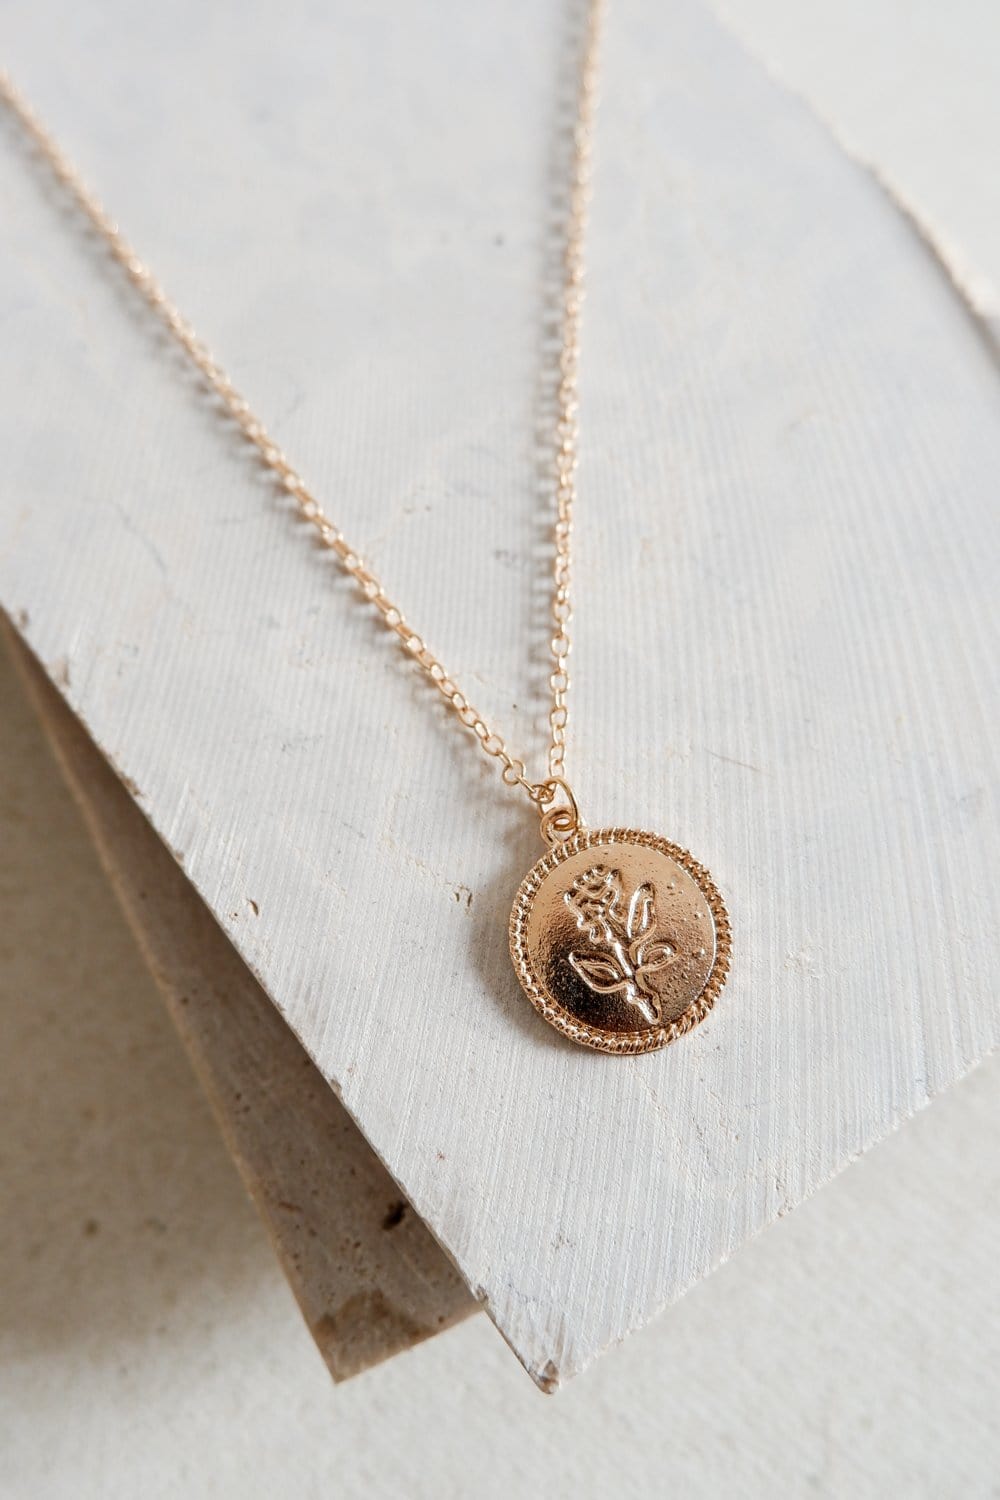 Rose Necklace - Women Jewelry - LOST IN PARADISE